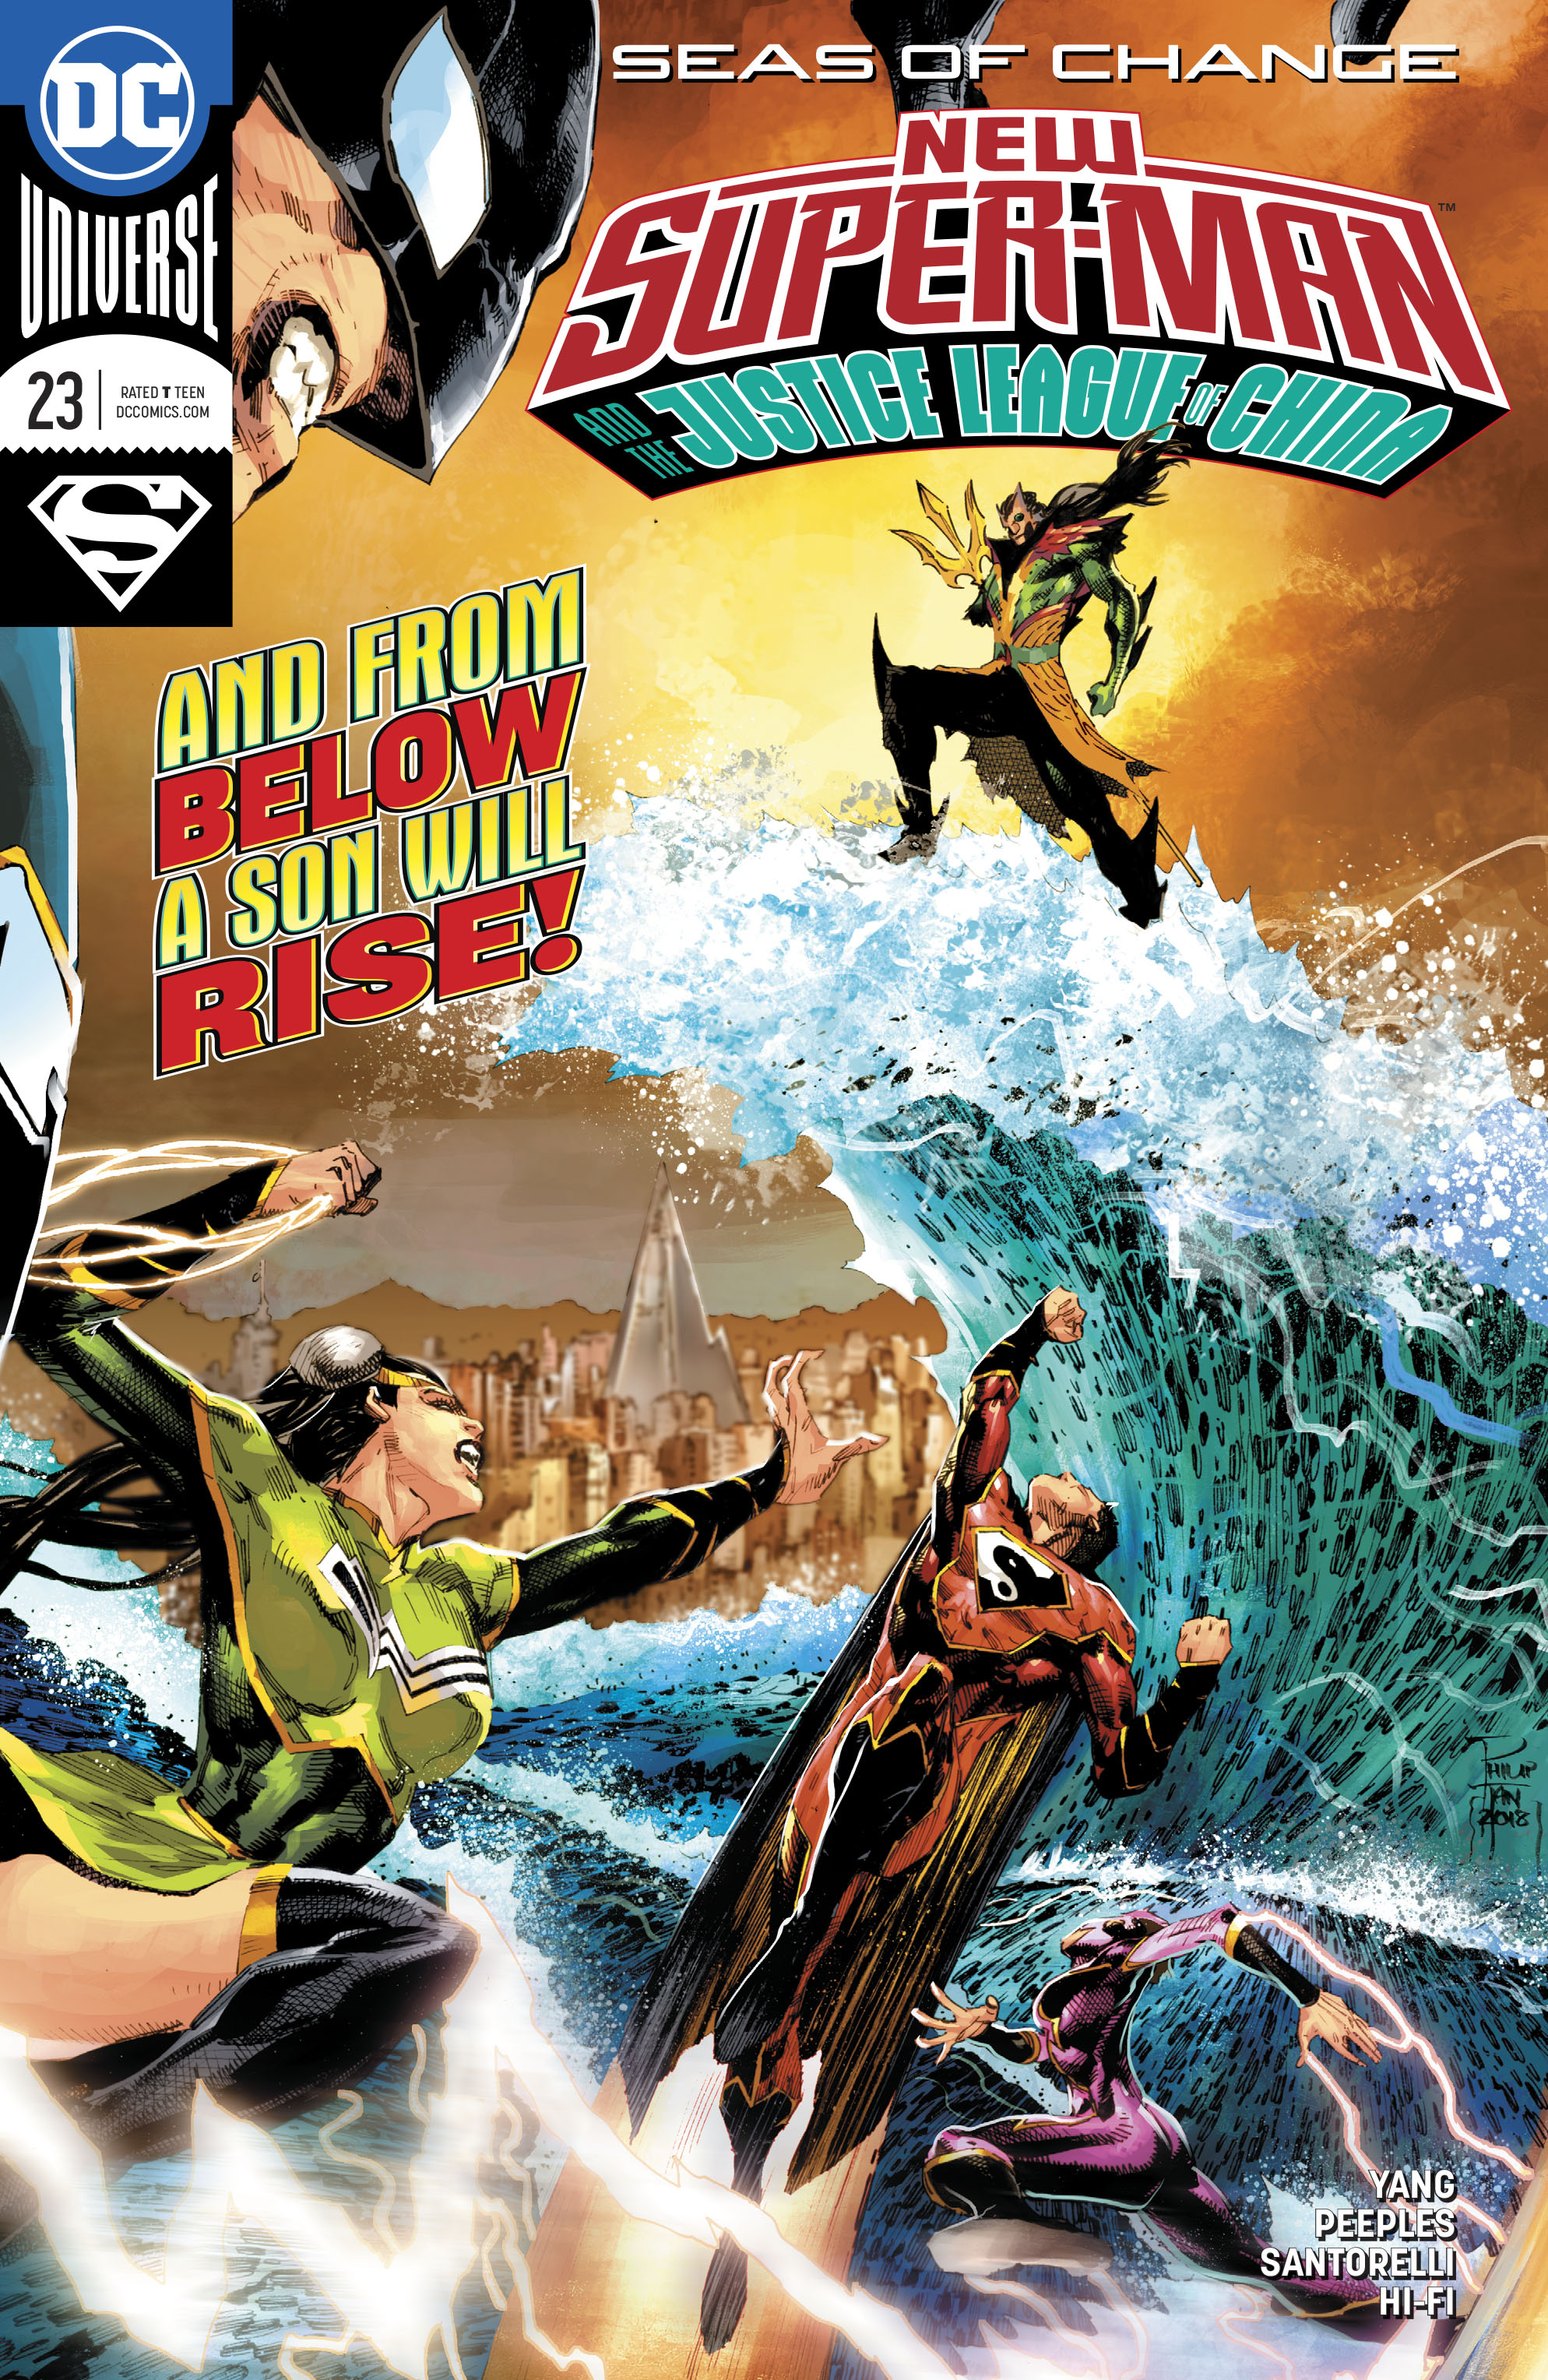 NEW SUPER MAN & THE JUSTICE LEAGUE OF CHINA #23